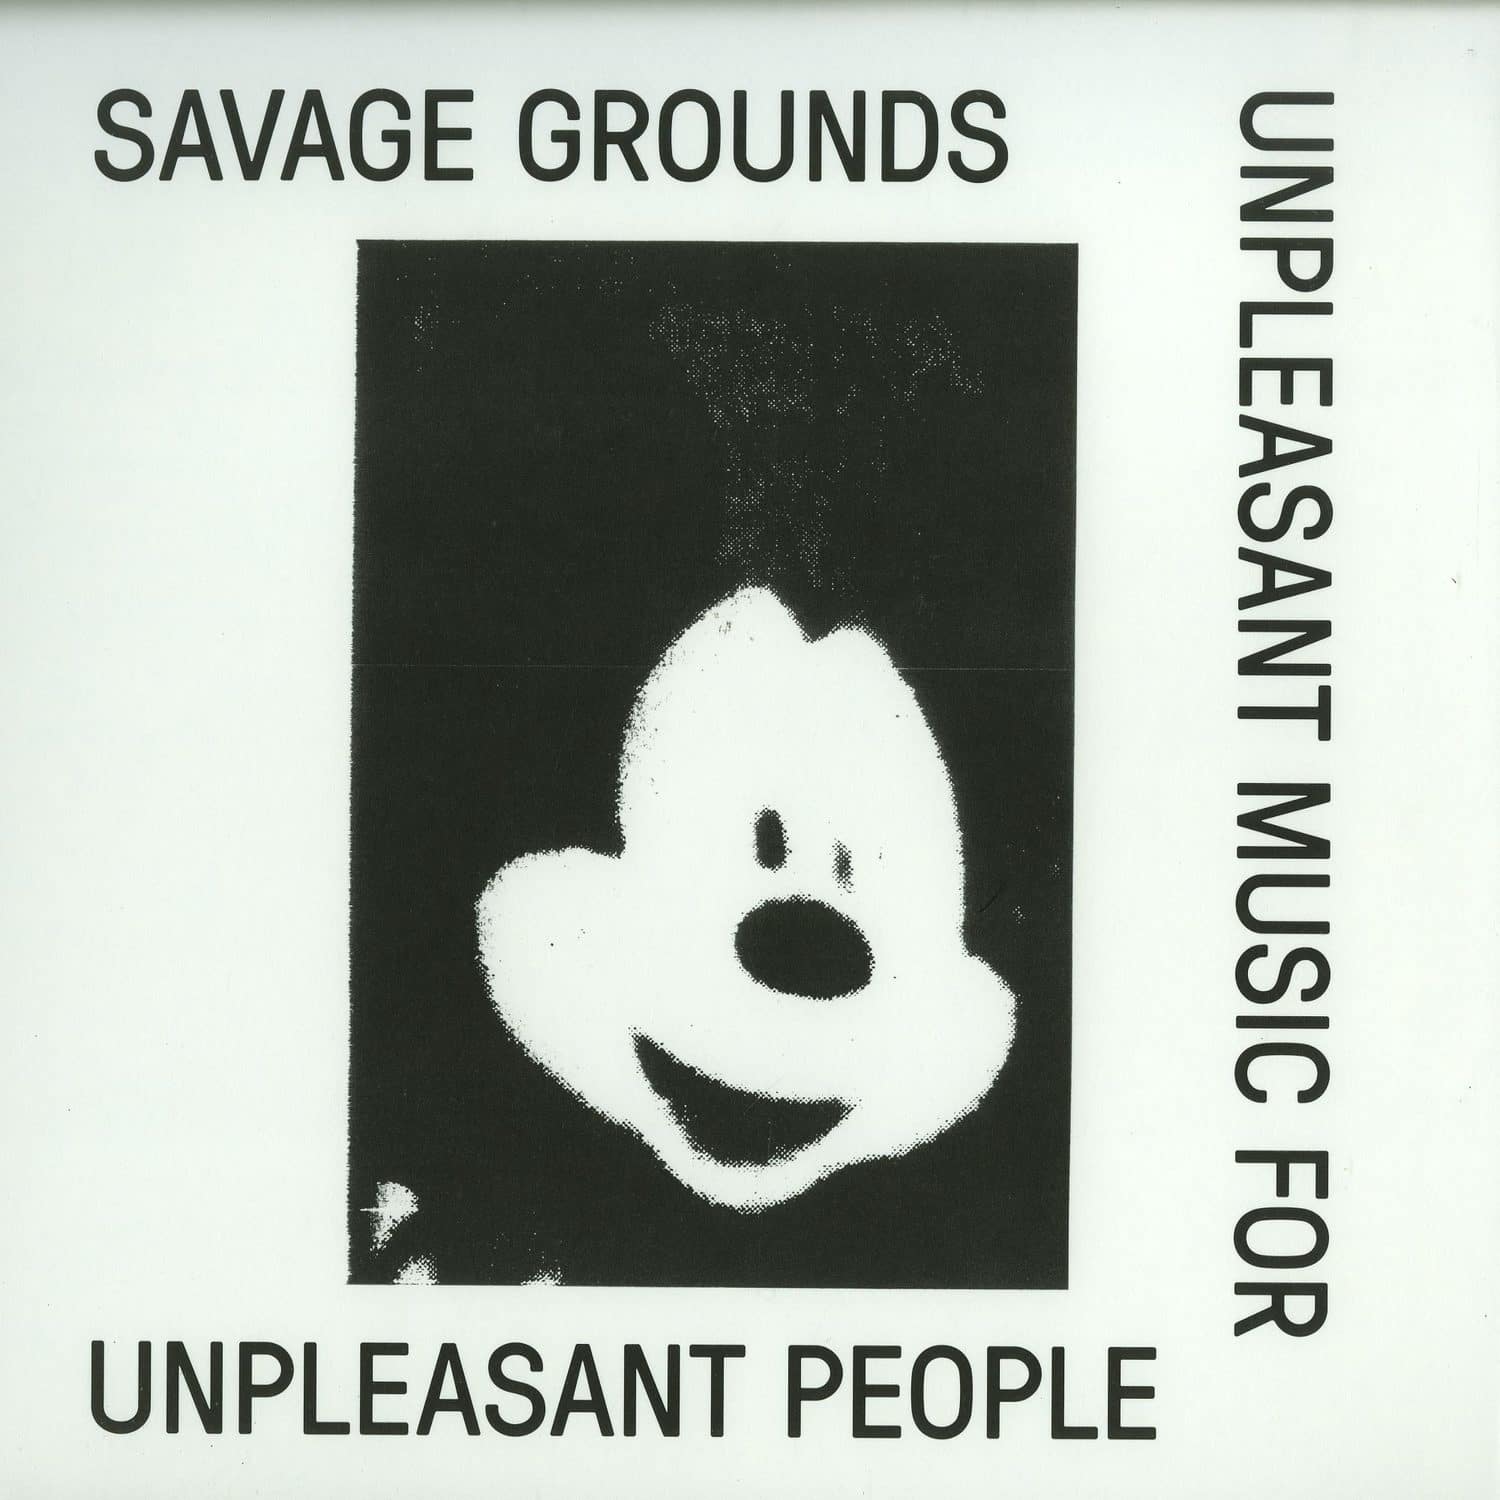 Savage Grounds - UNPLEASANT MUSIC FOR UNPLEASANT PEOPLE